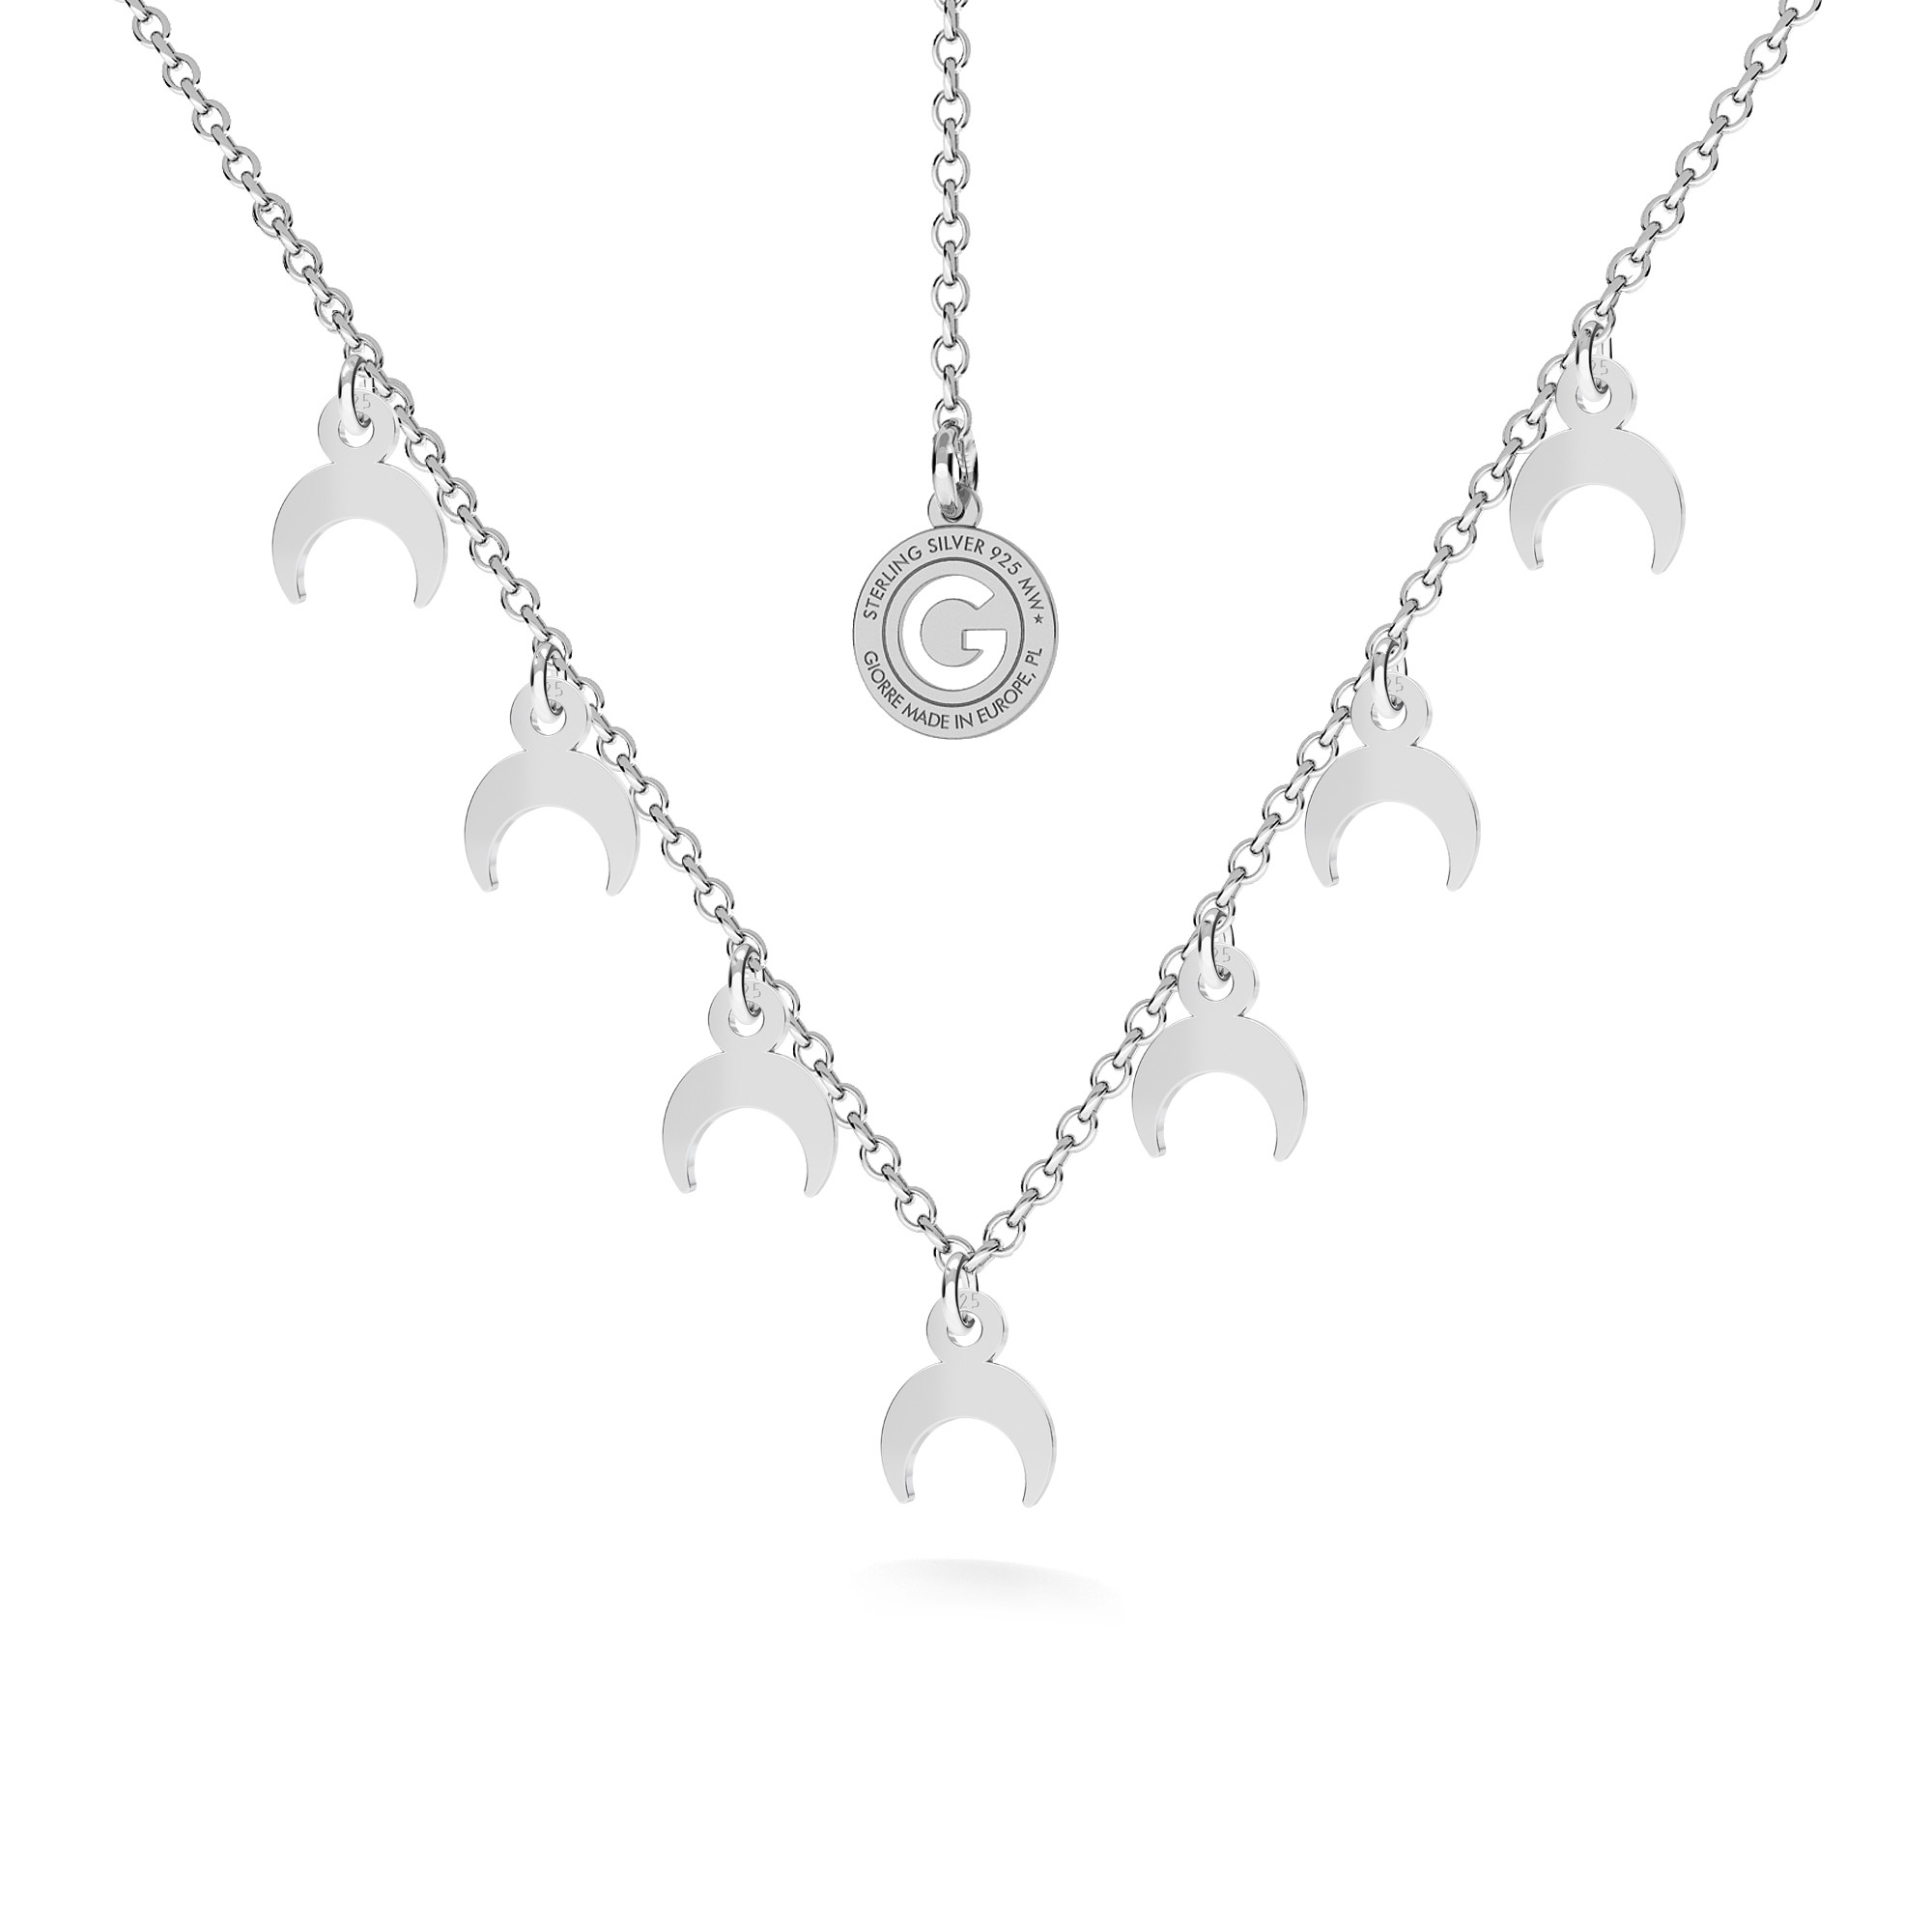 MOON necklace sterling silver 925